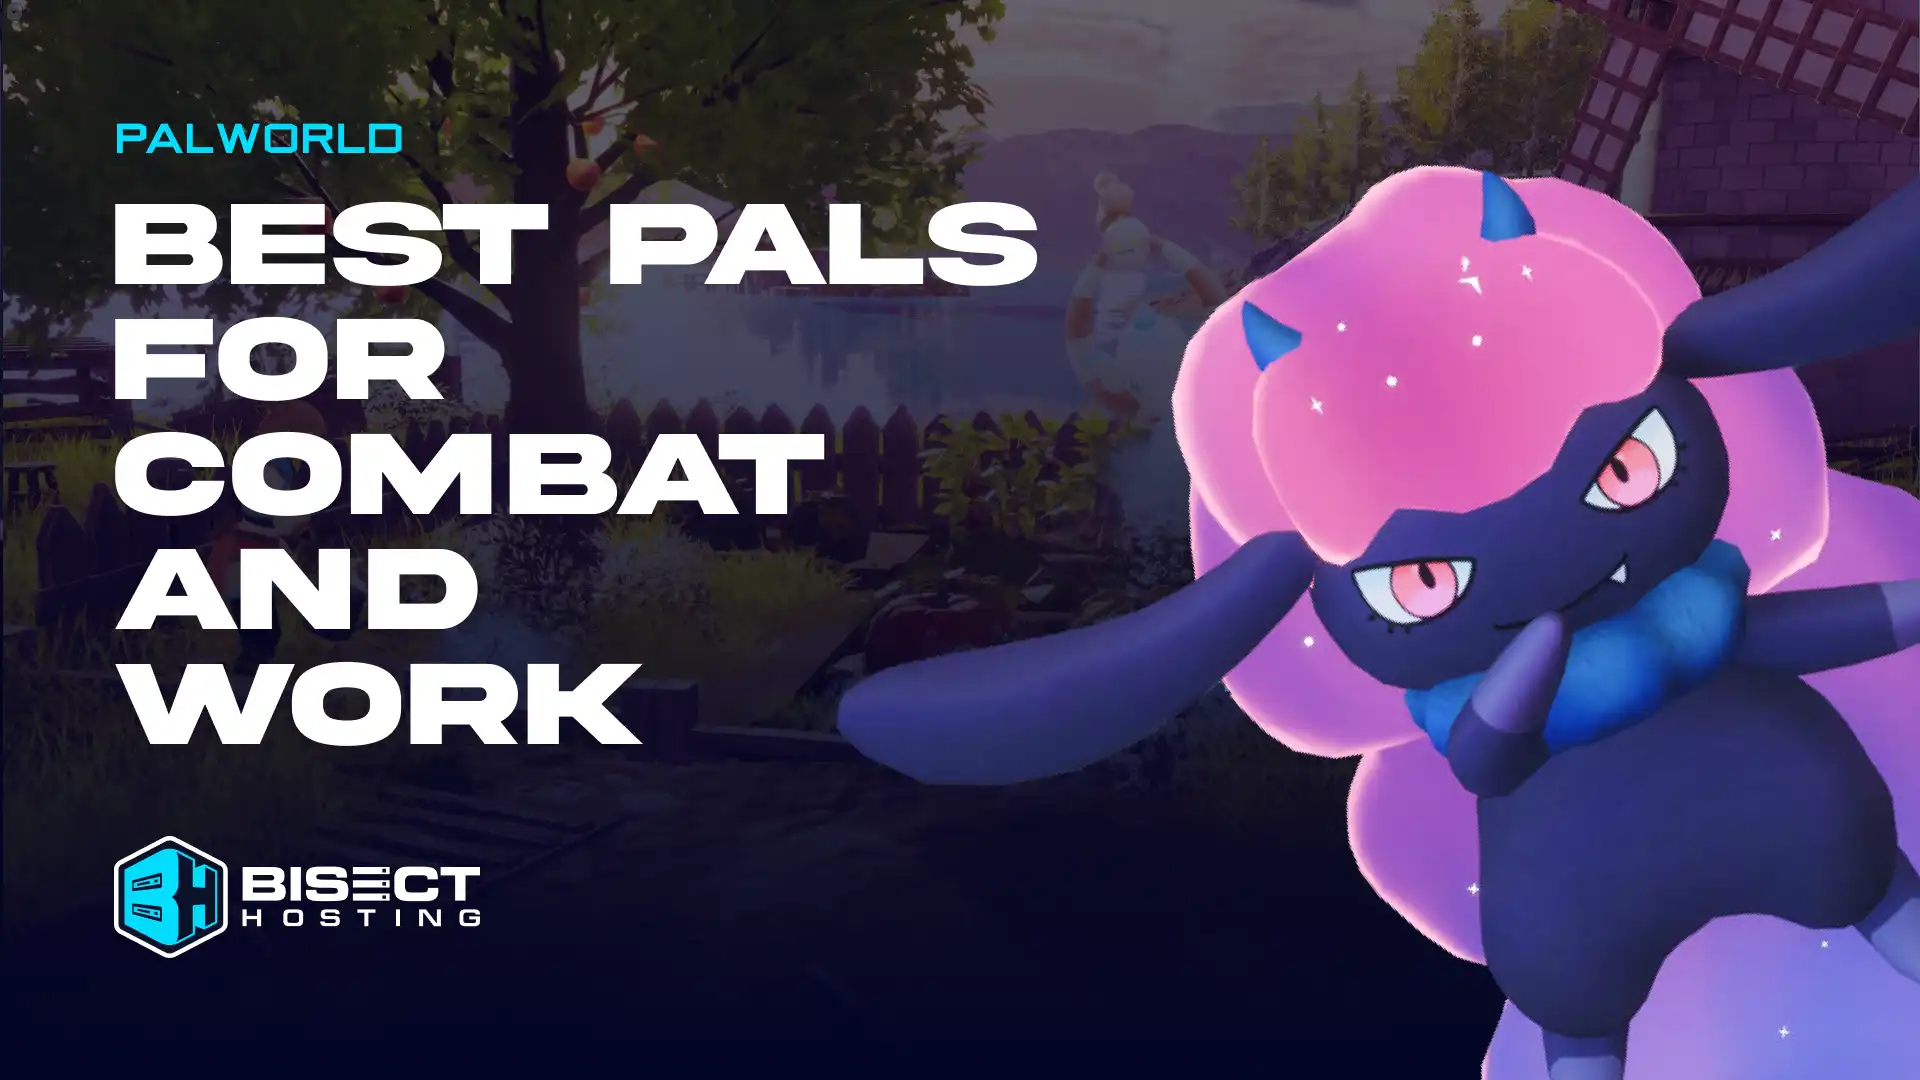 What are the Best Pals for Combat and Work in Palworld?